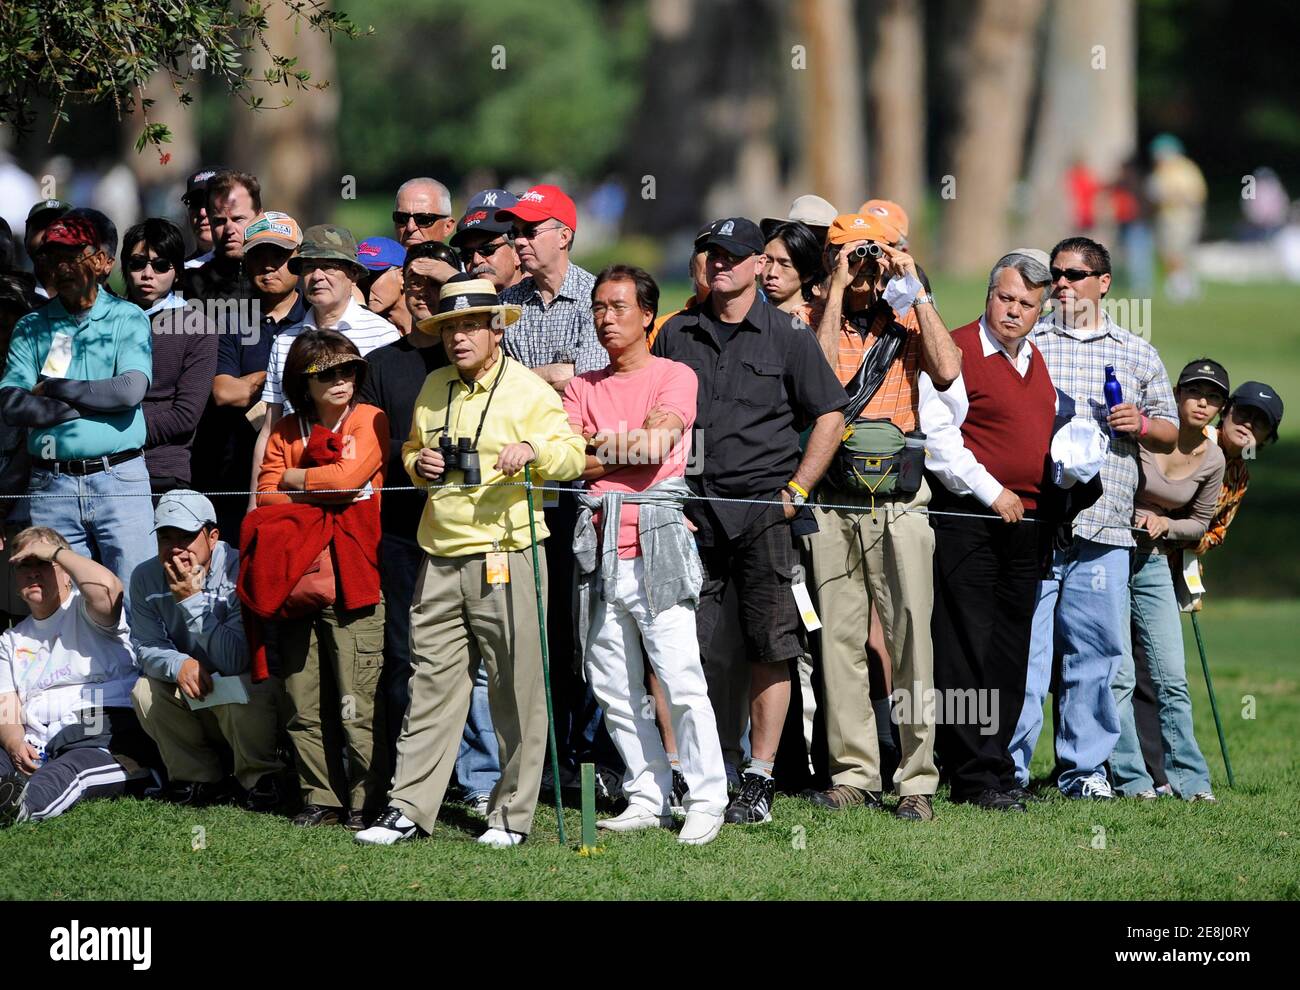 Onlookers watch Japan's Ryo Ishikawa, 17, during the second round of the Northern Trust Open golf tournament in the Pacific Palisades area of Los Angeles February 20, 2009. REUTERS/Gus Ruelas (UNITED STATES) Stock Photo